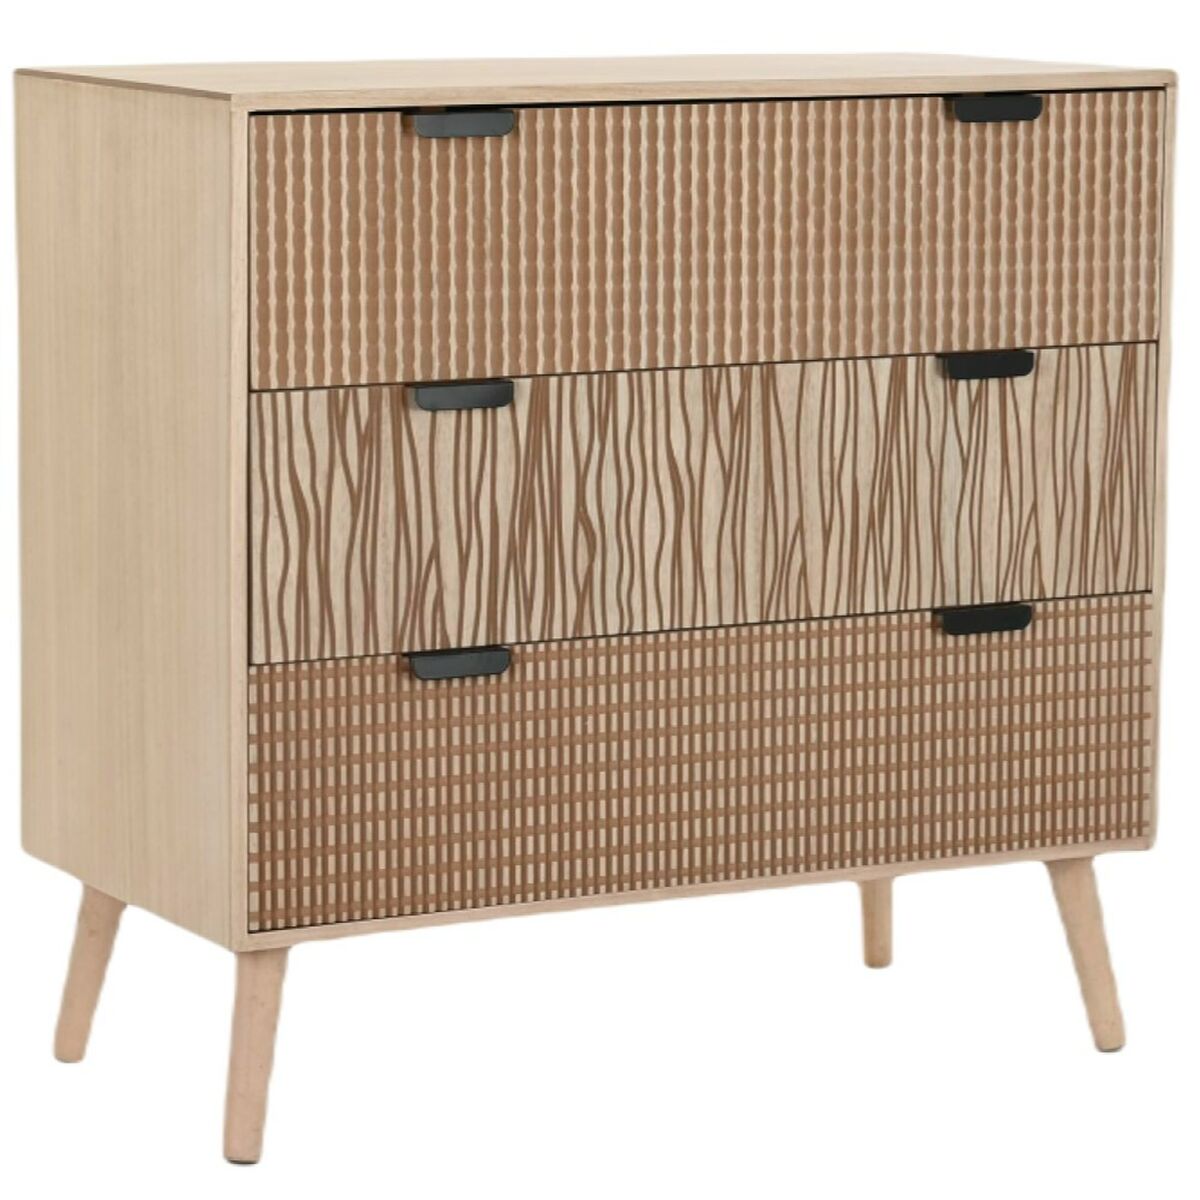 Chest of drawers in Wood with Black Handles (80 x 40 x 77 cm)